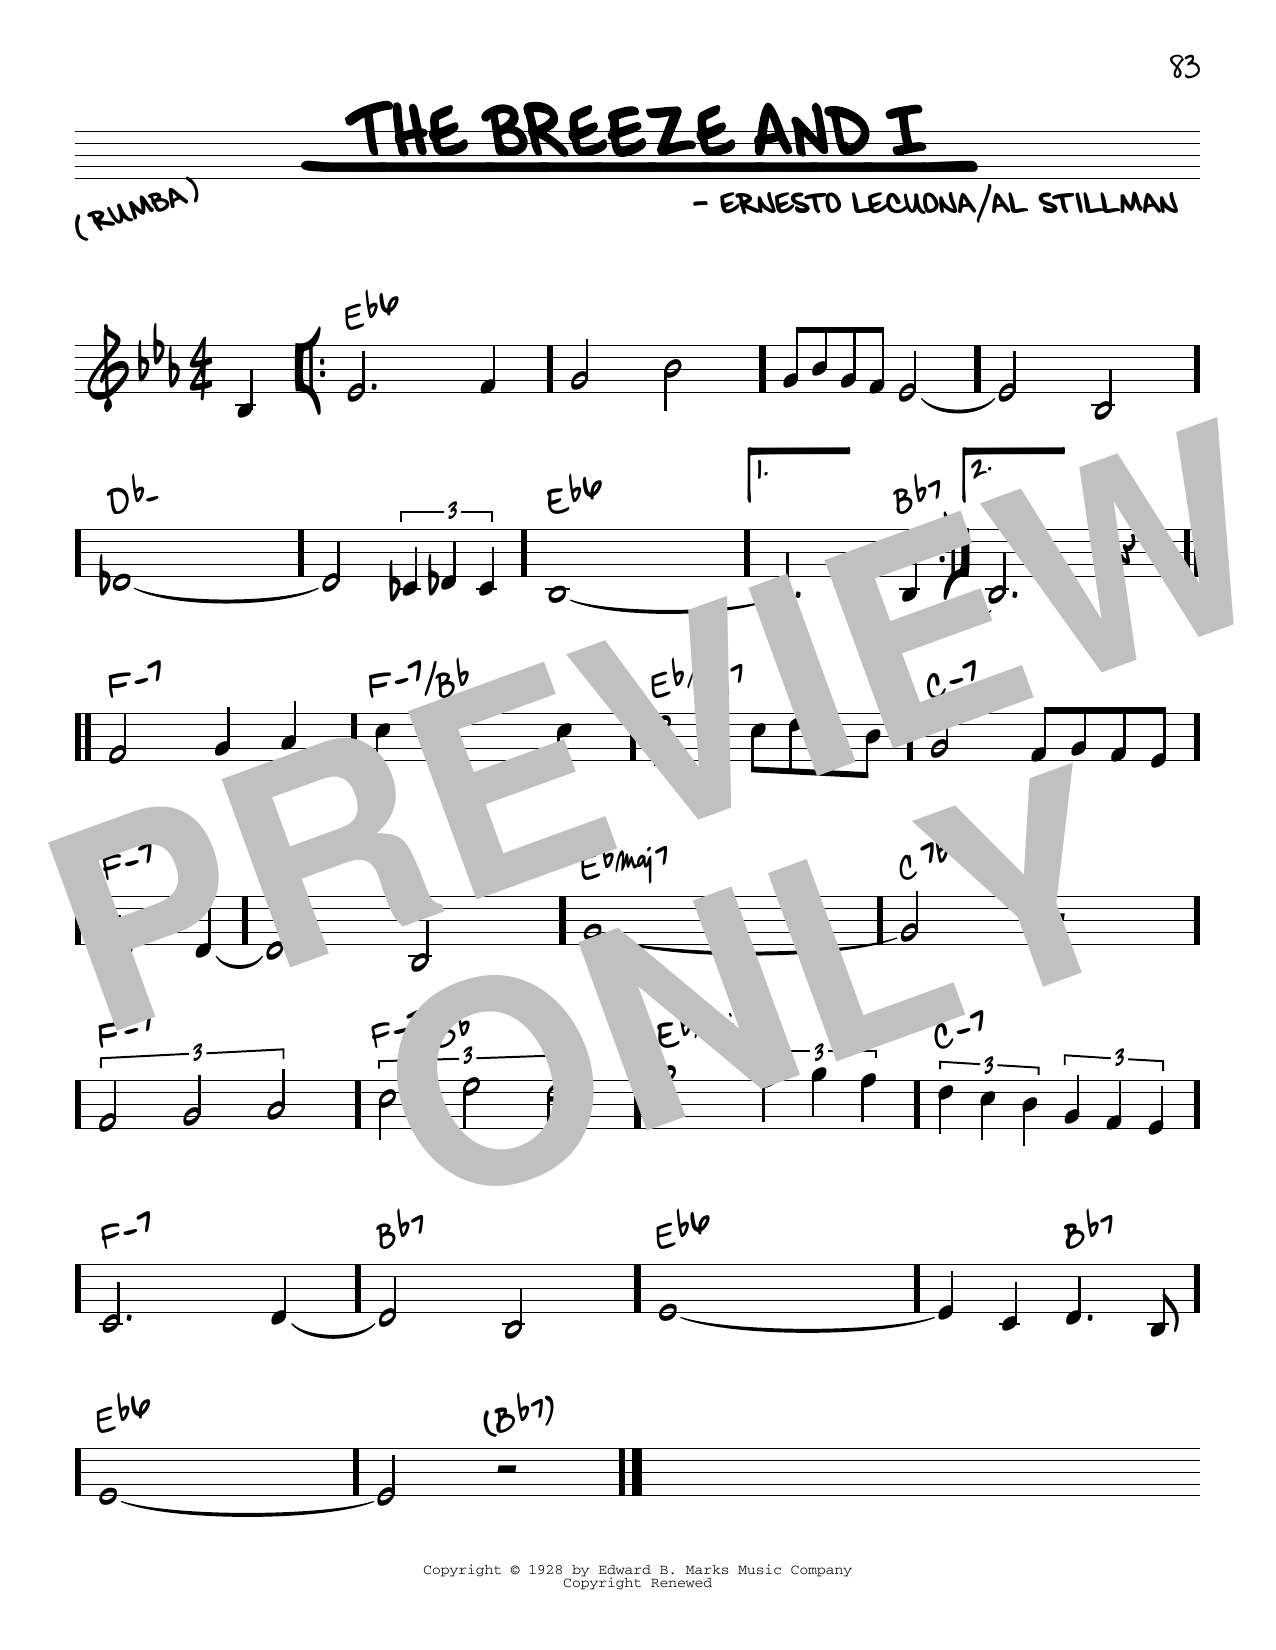 Ernesto Lecuona The Breeze And I sheet music notes and chords. Download Printable PDF.